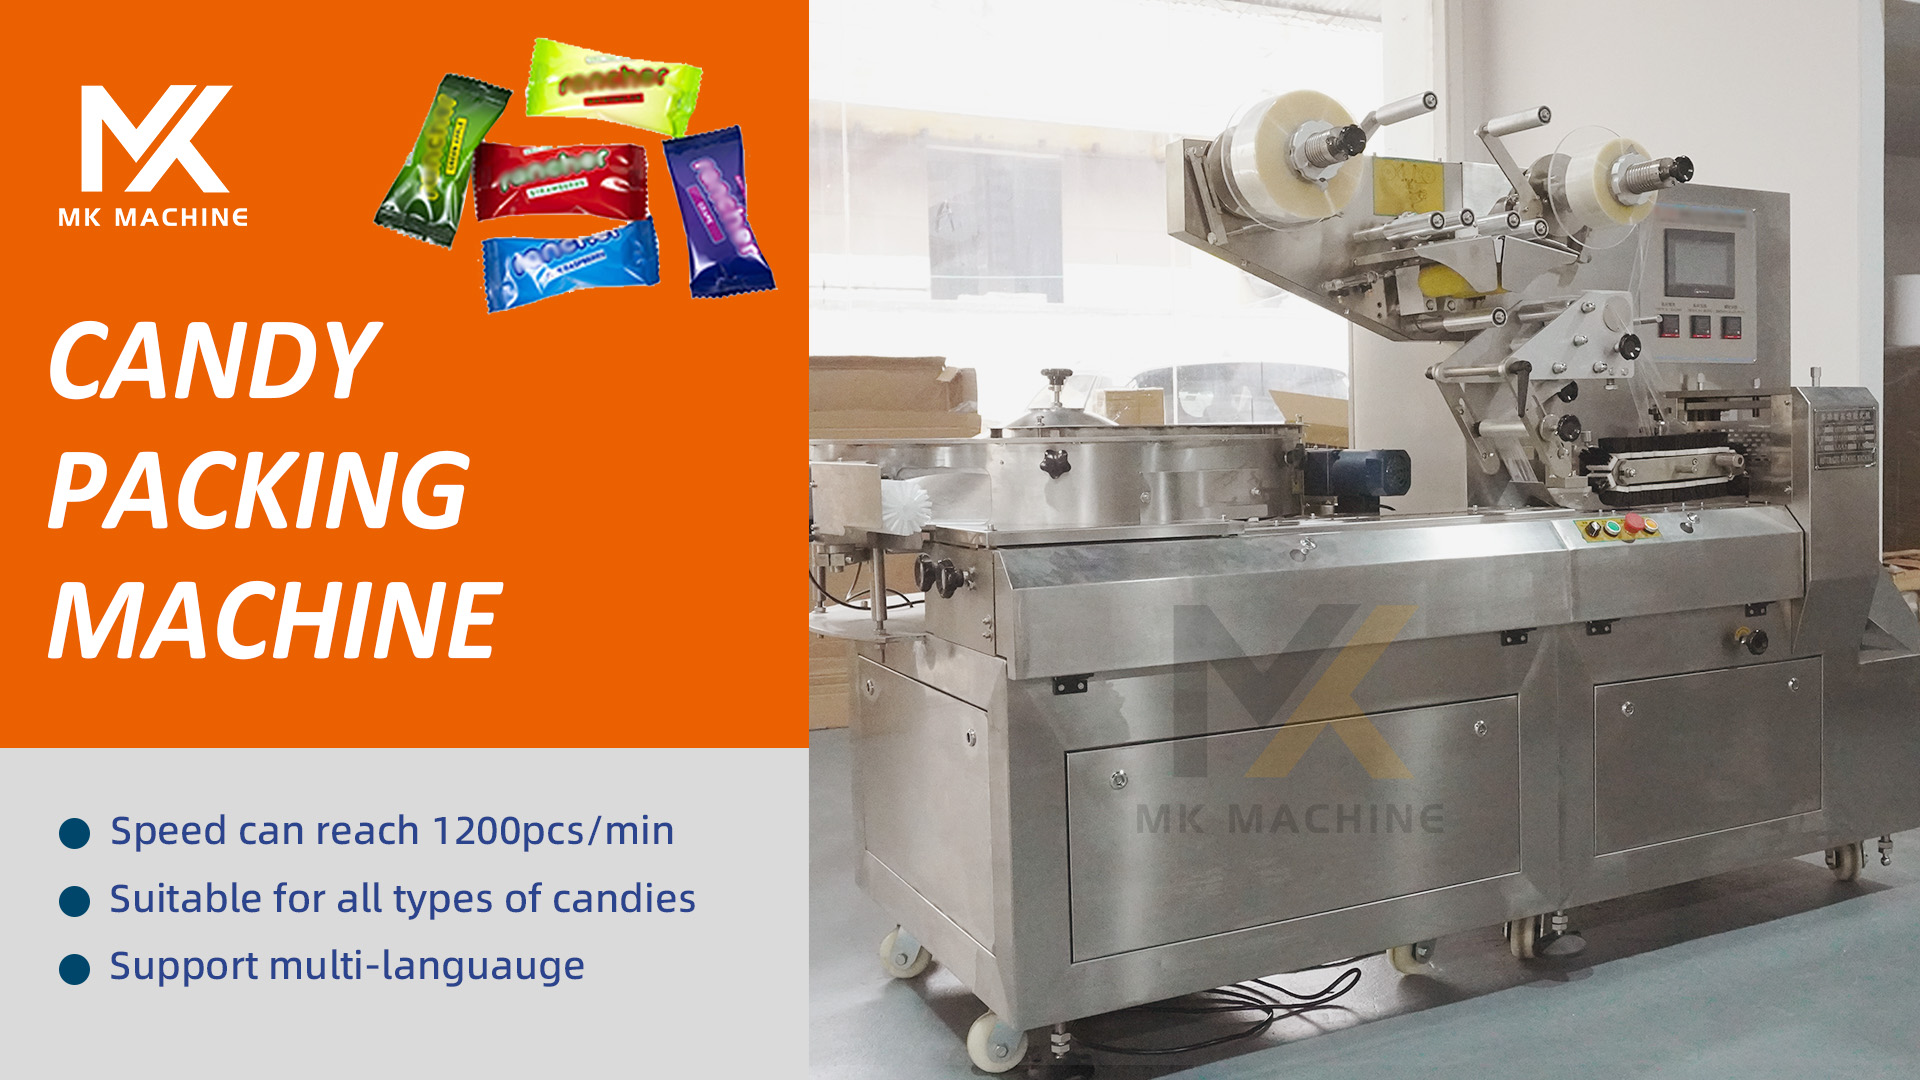 High Speed Candy Wrapping Machine, Candy Packaging Machine, Confectionery soft candy bear gummy